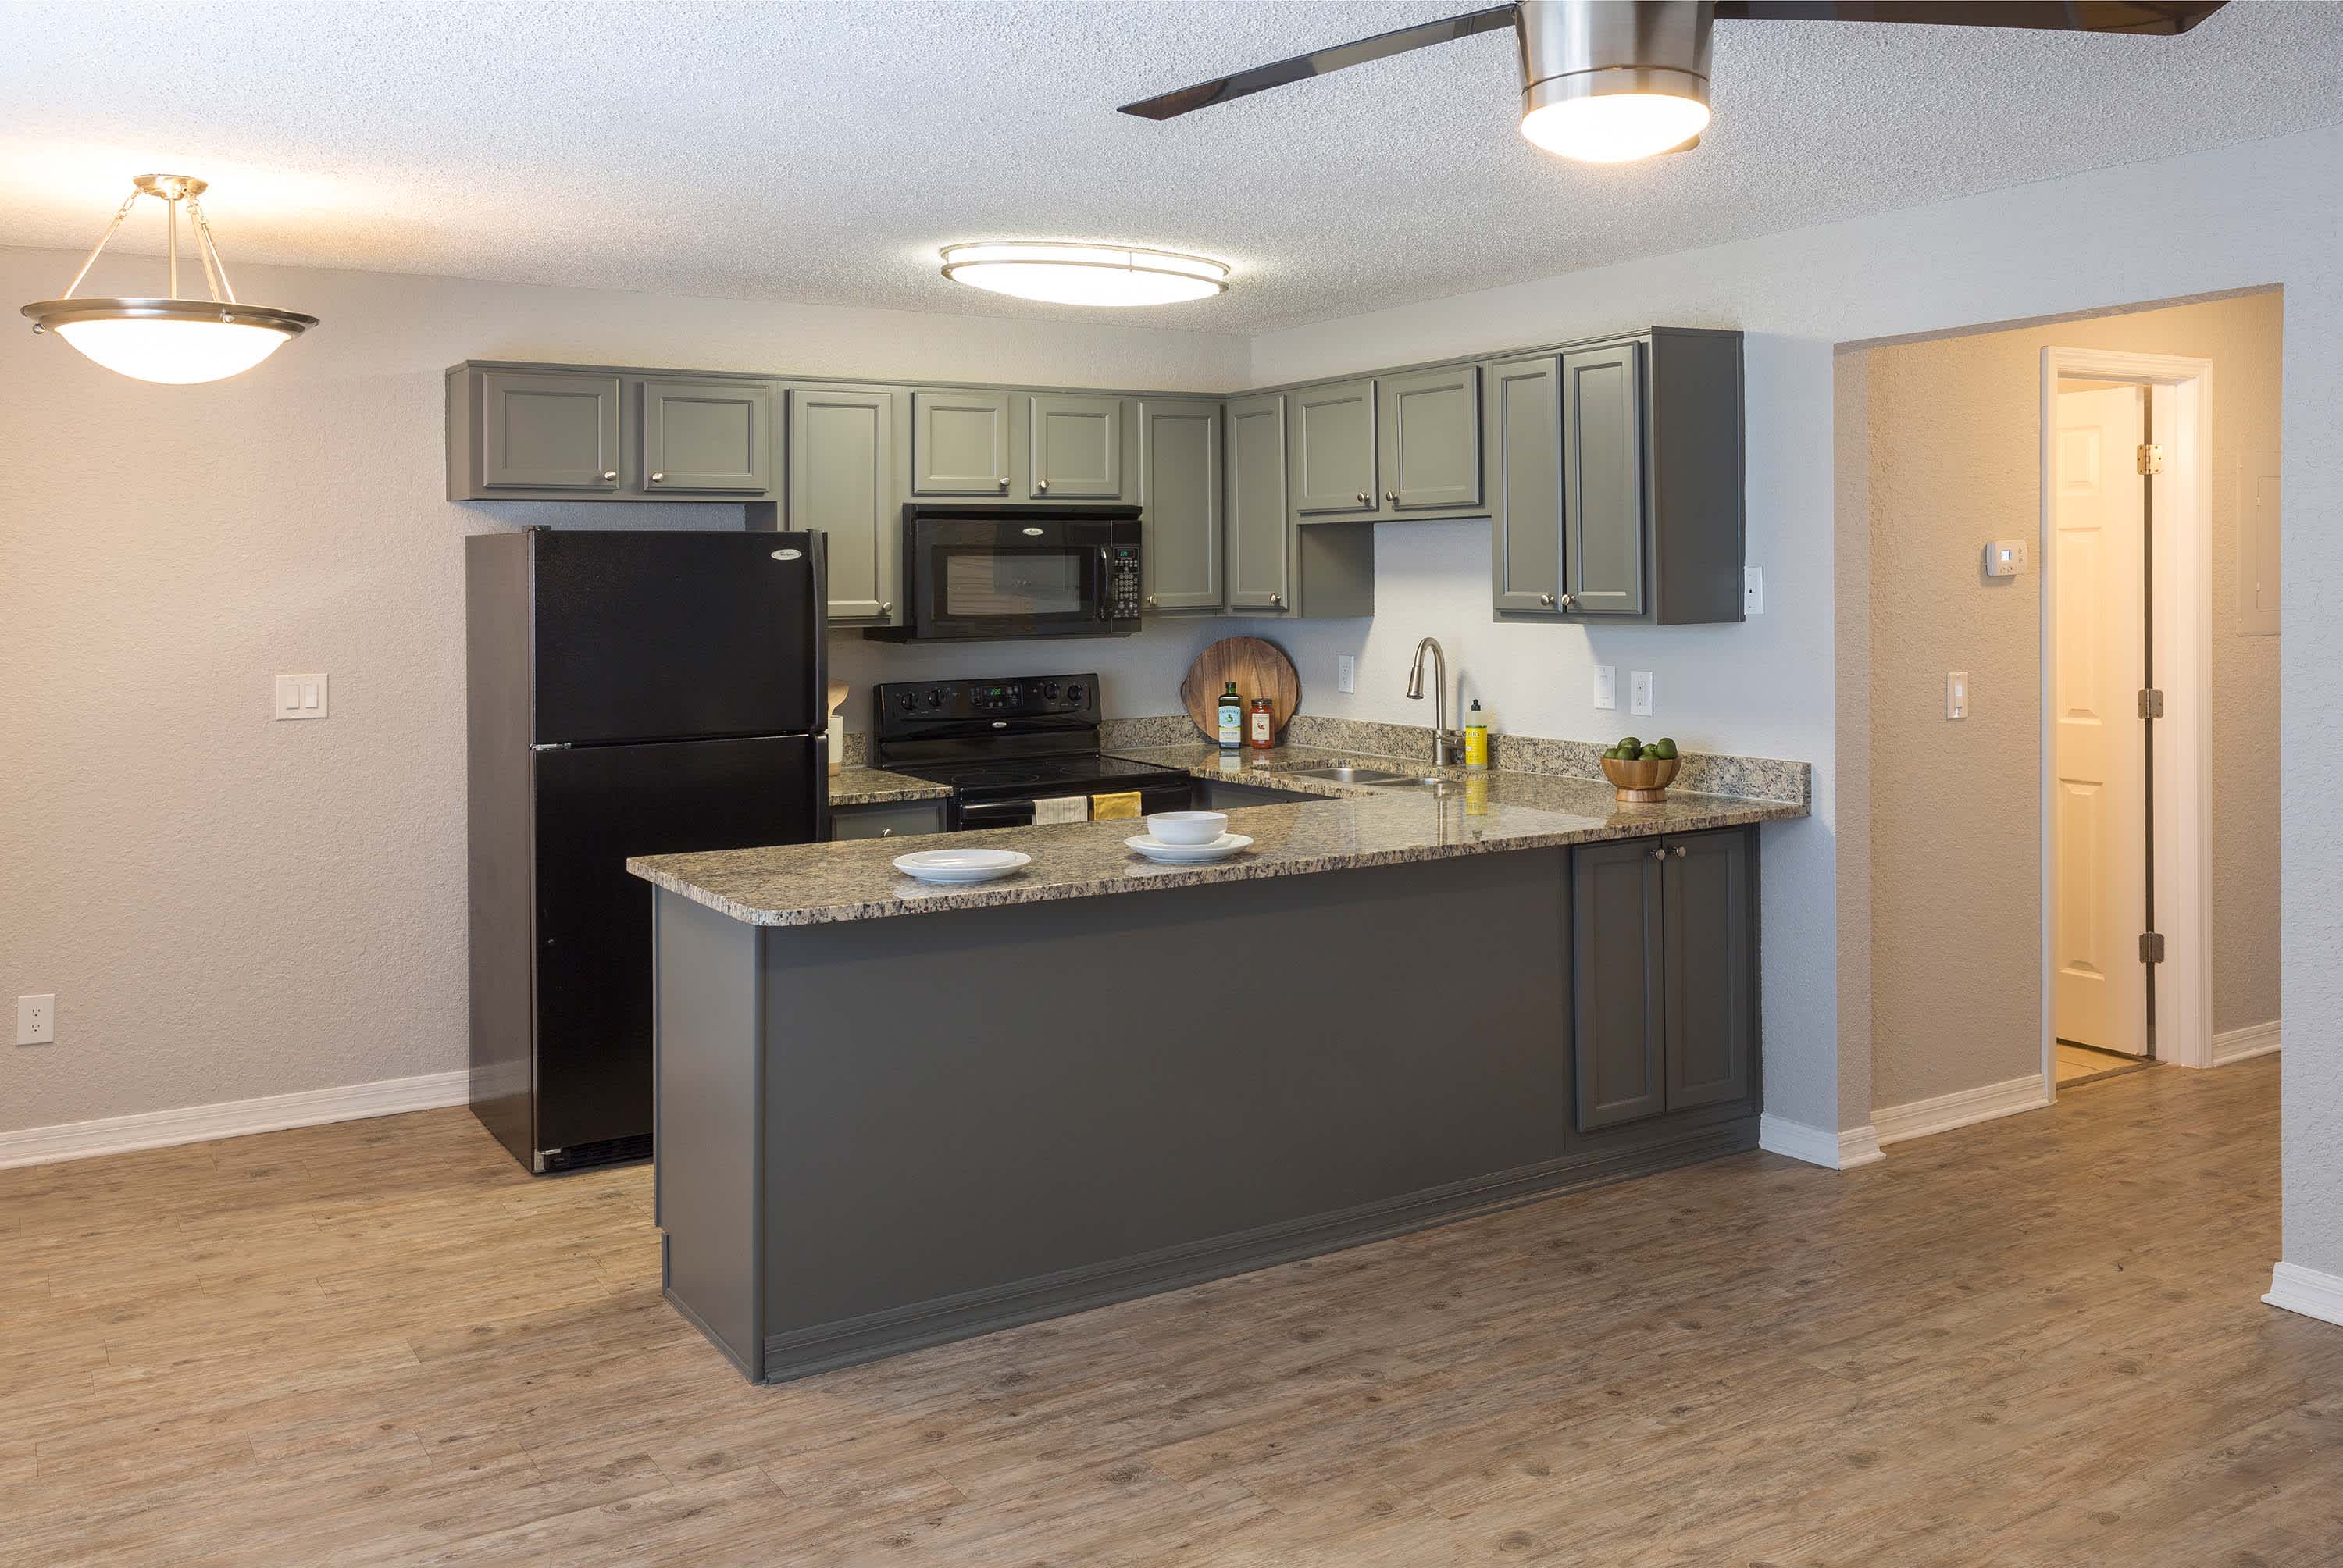 Boulevard - 2 Bed 1 Bath - Kitchen - Gray Style Cabinets